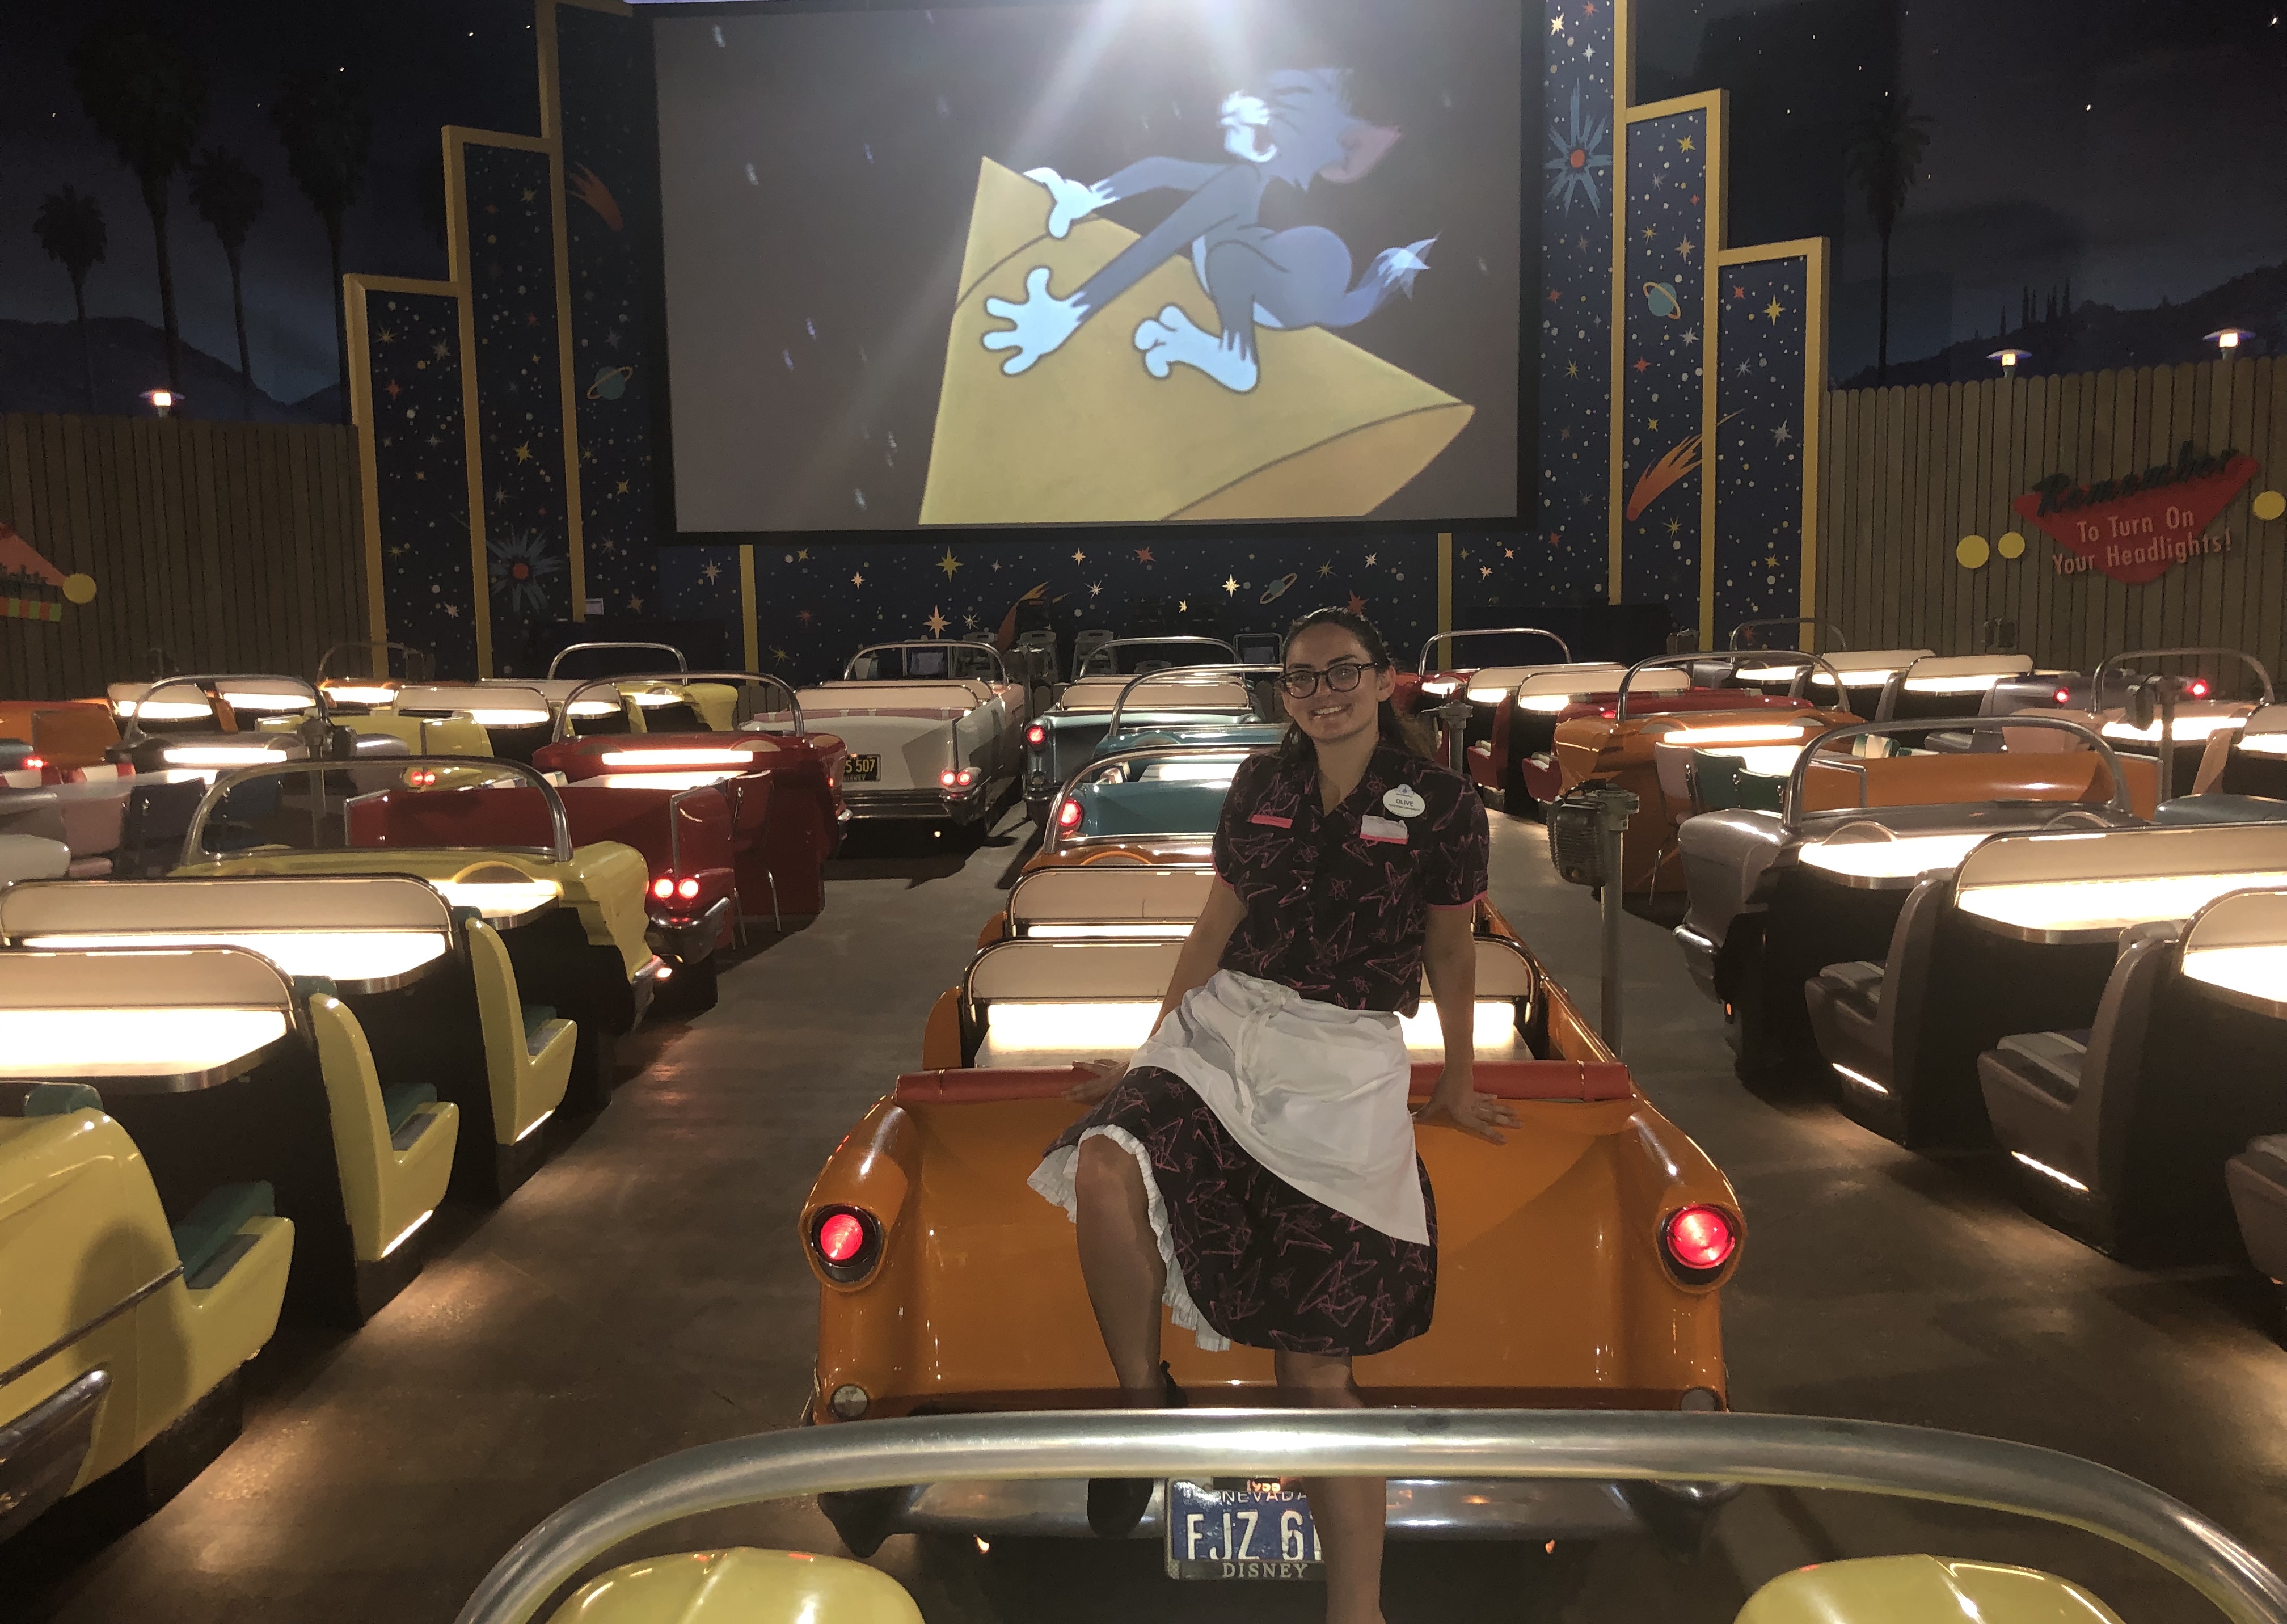 Olivia Bauer, wearing a costume and apron and sitting on the hood of a prop car, surrounded by diner booths with a screen showing a Tom and Jerry episode in the background 